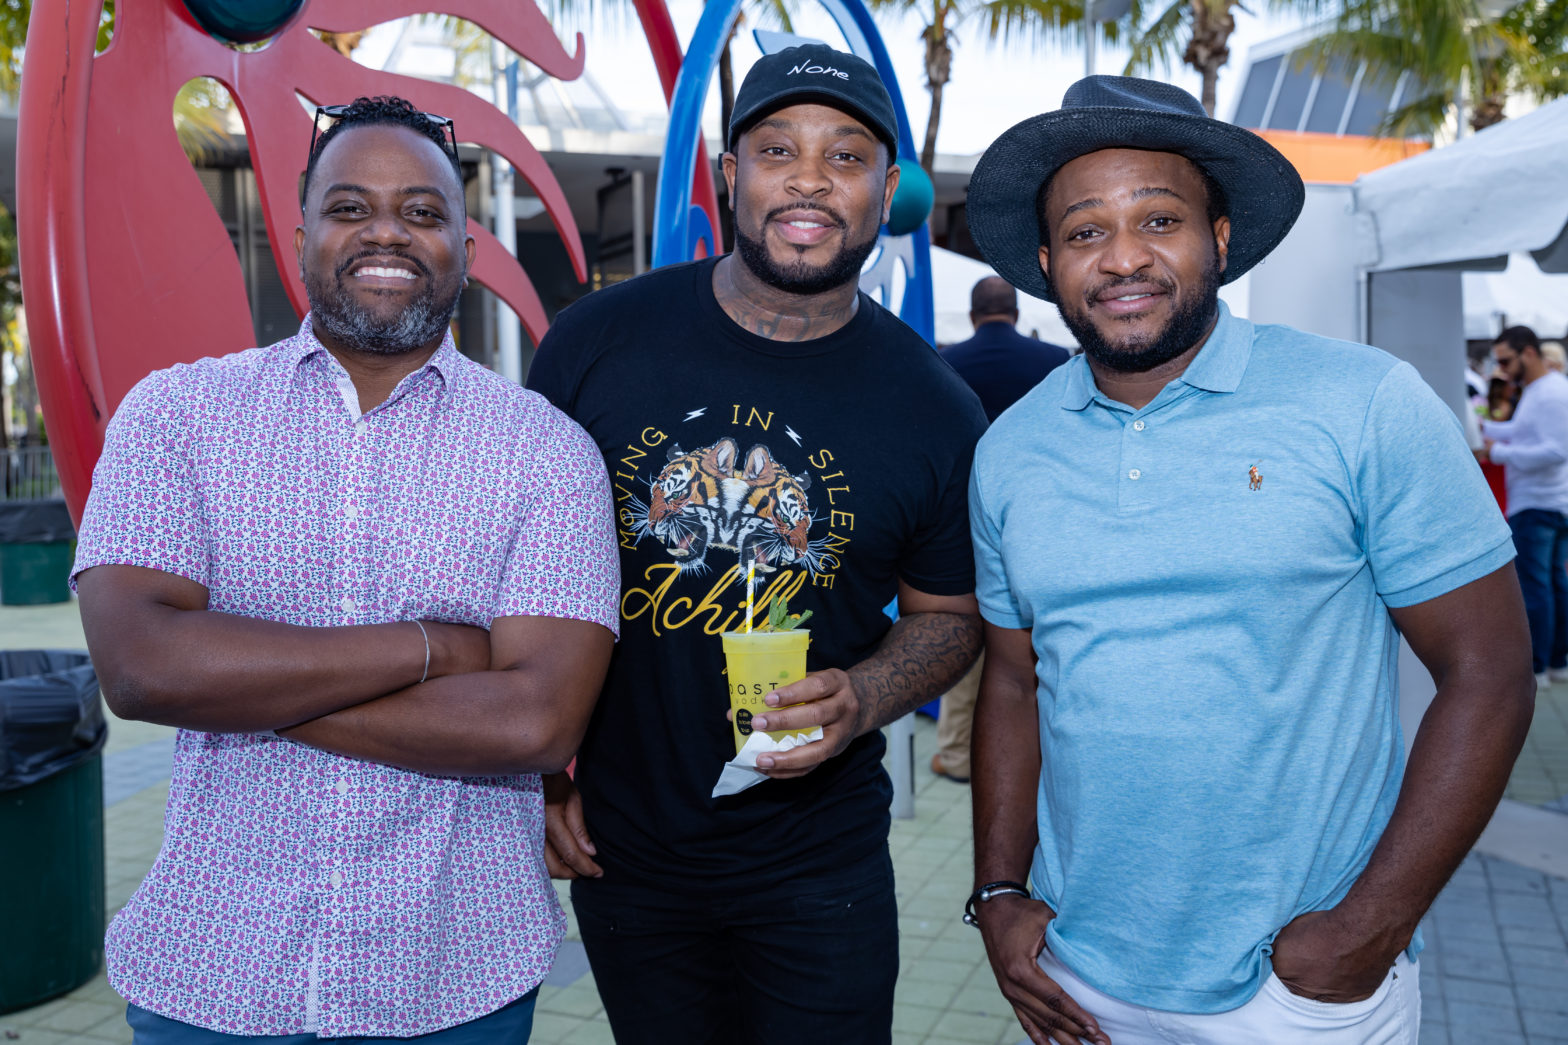 Meet The Men Behind The Immersive Creole Food Festival Experience